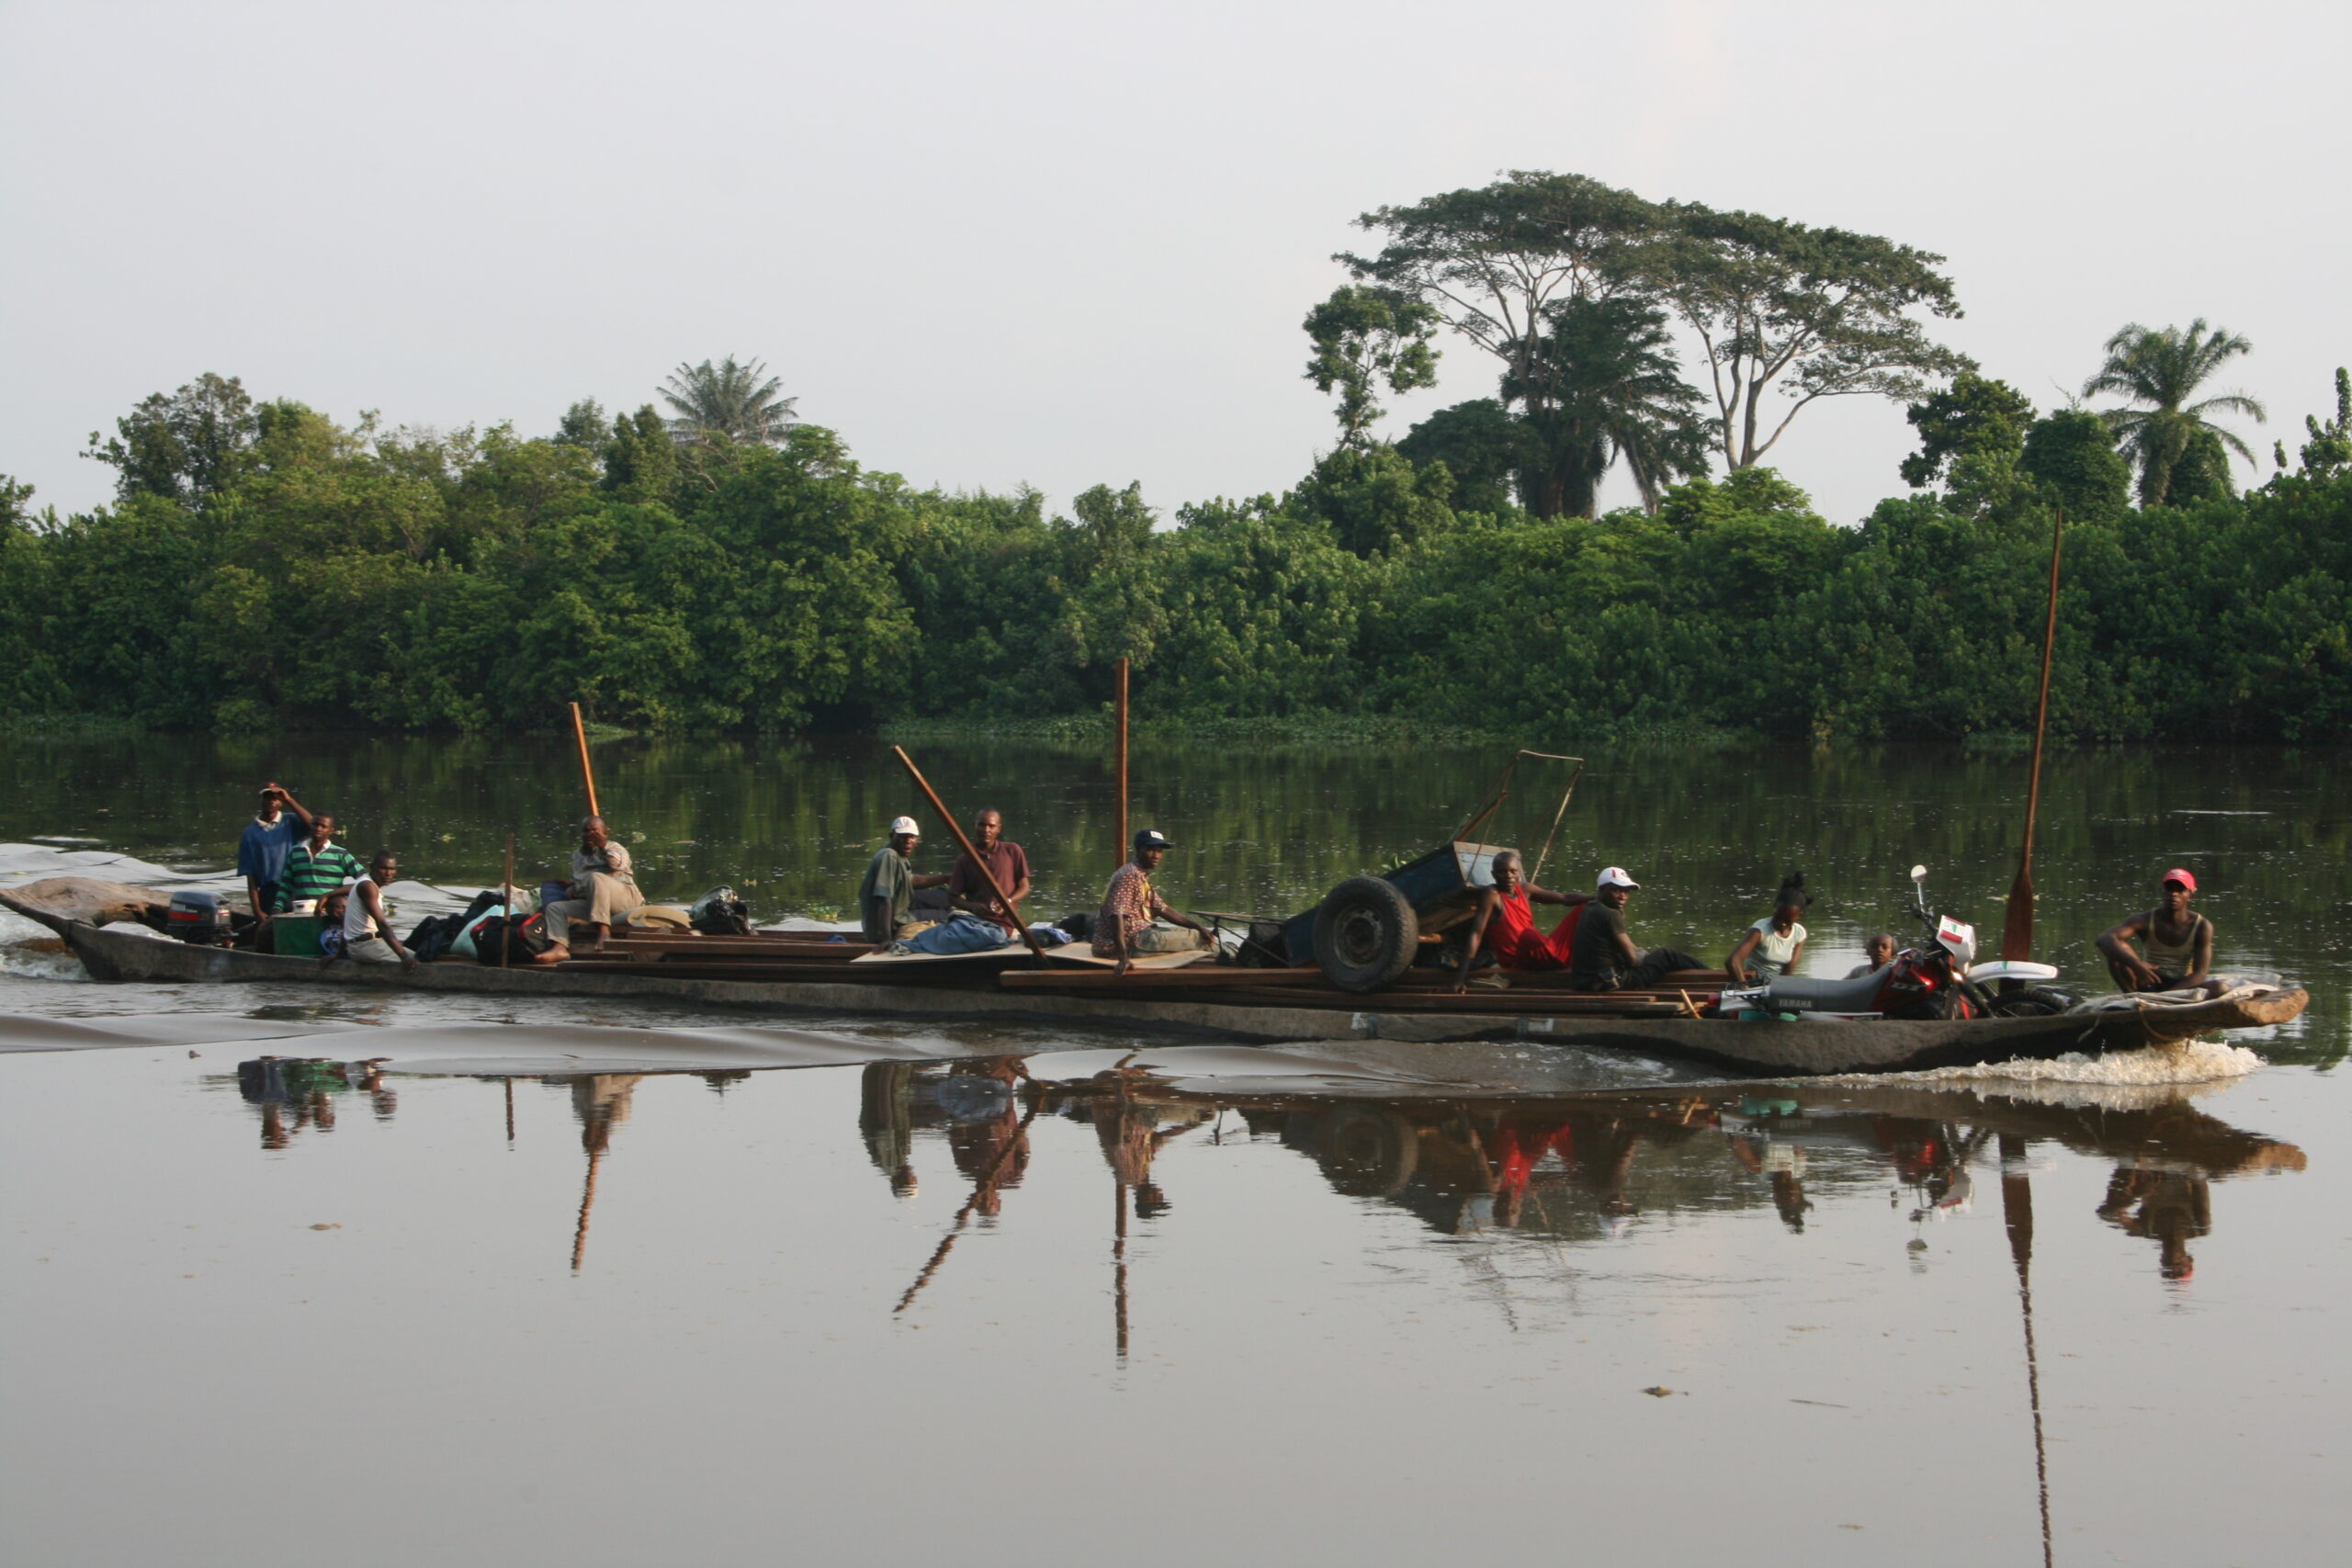 Large pirogue with many people